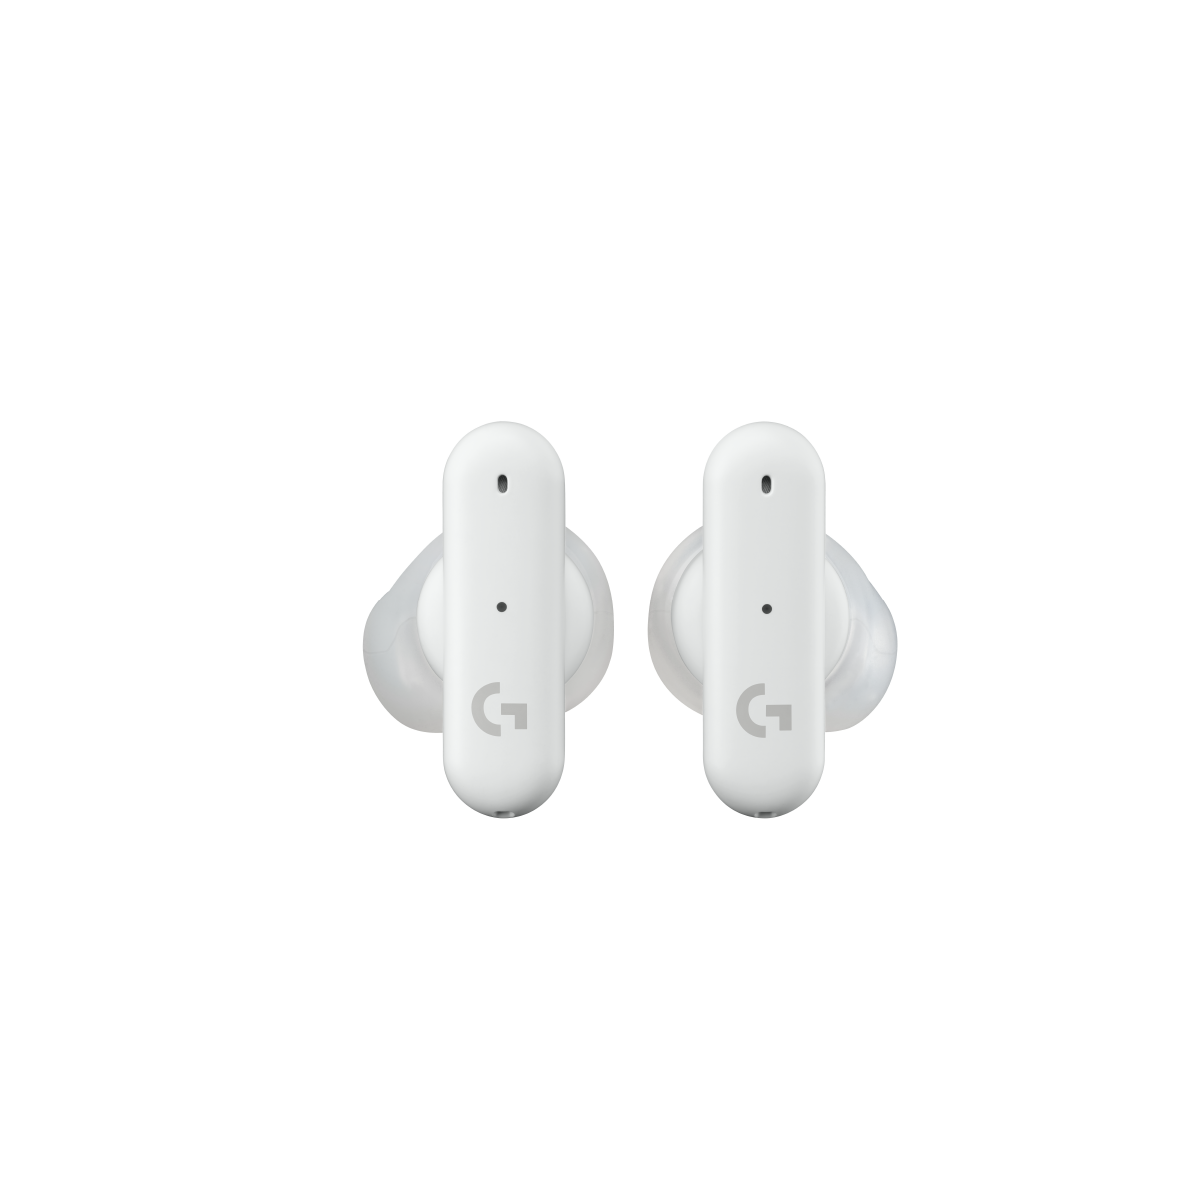 FITS True Wireless Gaming Earbuds